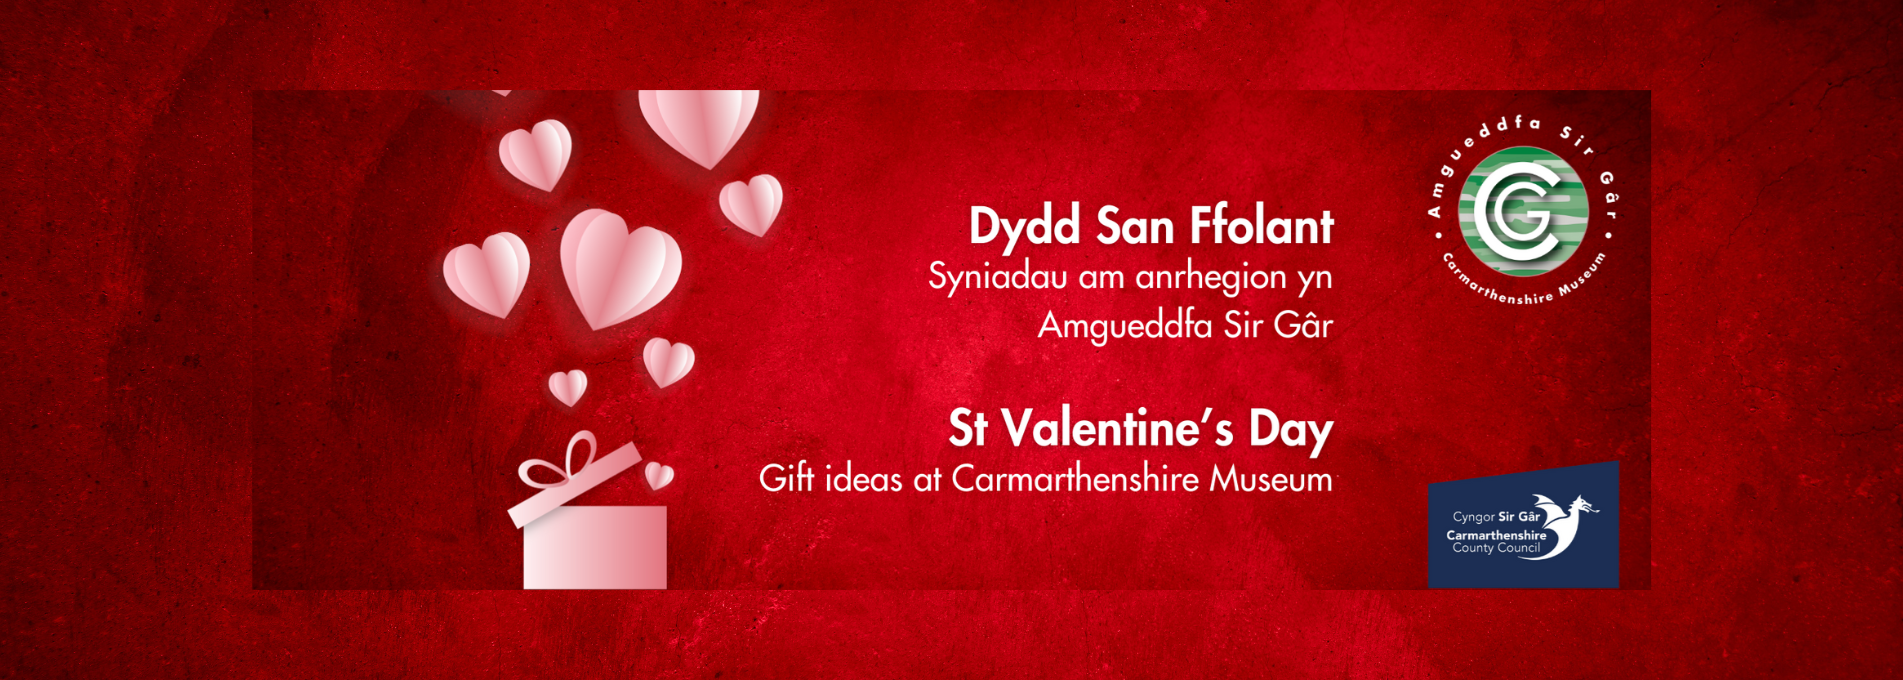 St Valentine's Day Gift Ideas at Carmarthenshire Museum